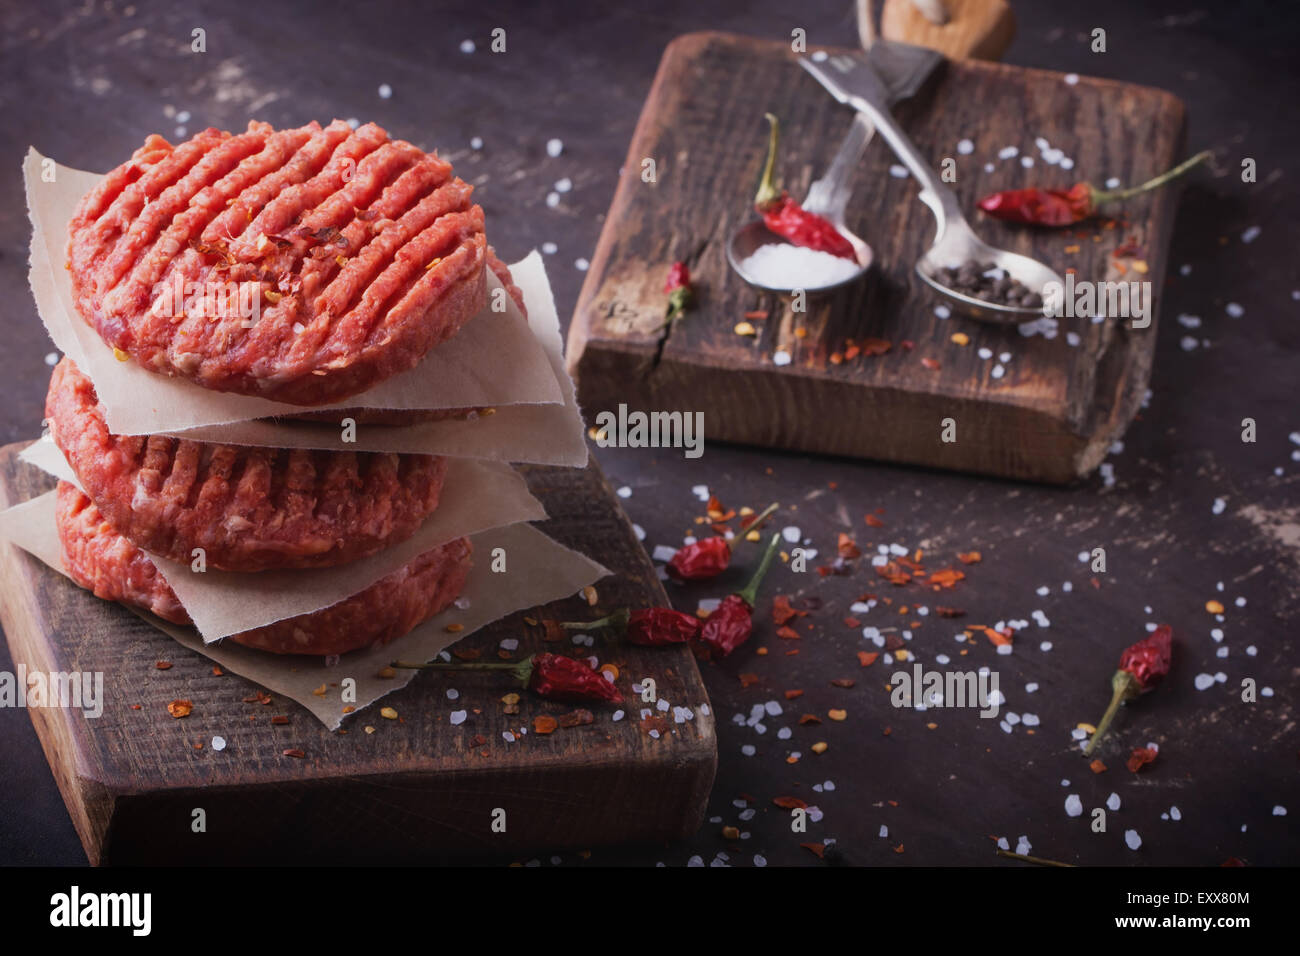 Raw Ground beef meat Burger steak cutlets with seasoning on vintage wooden boards, black background Stock Photo